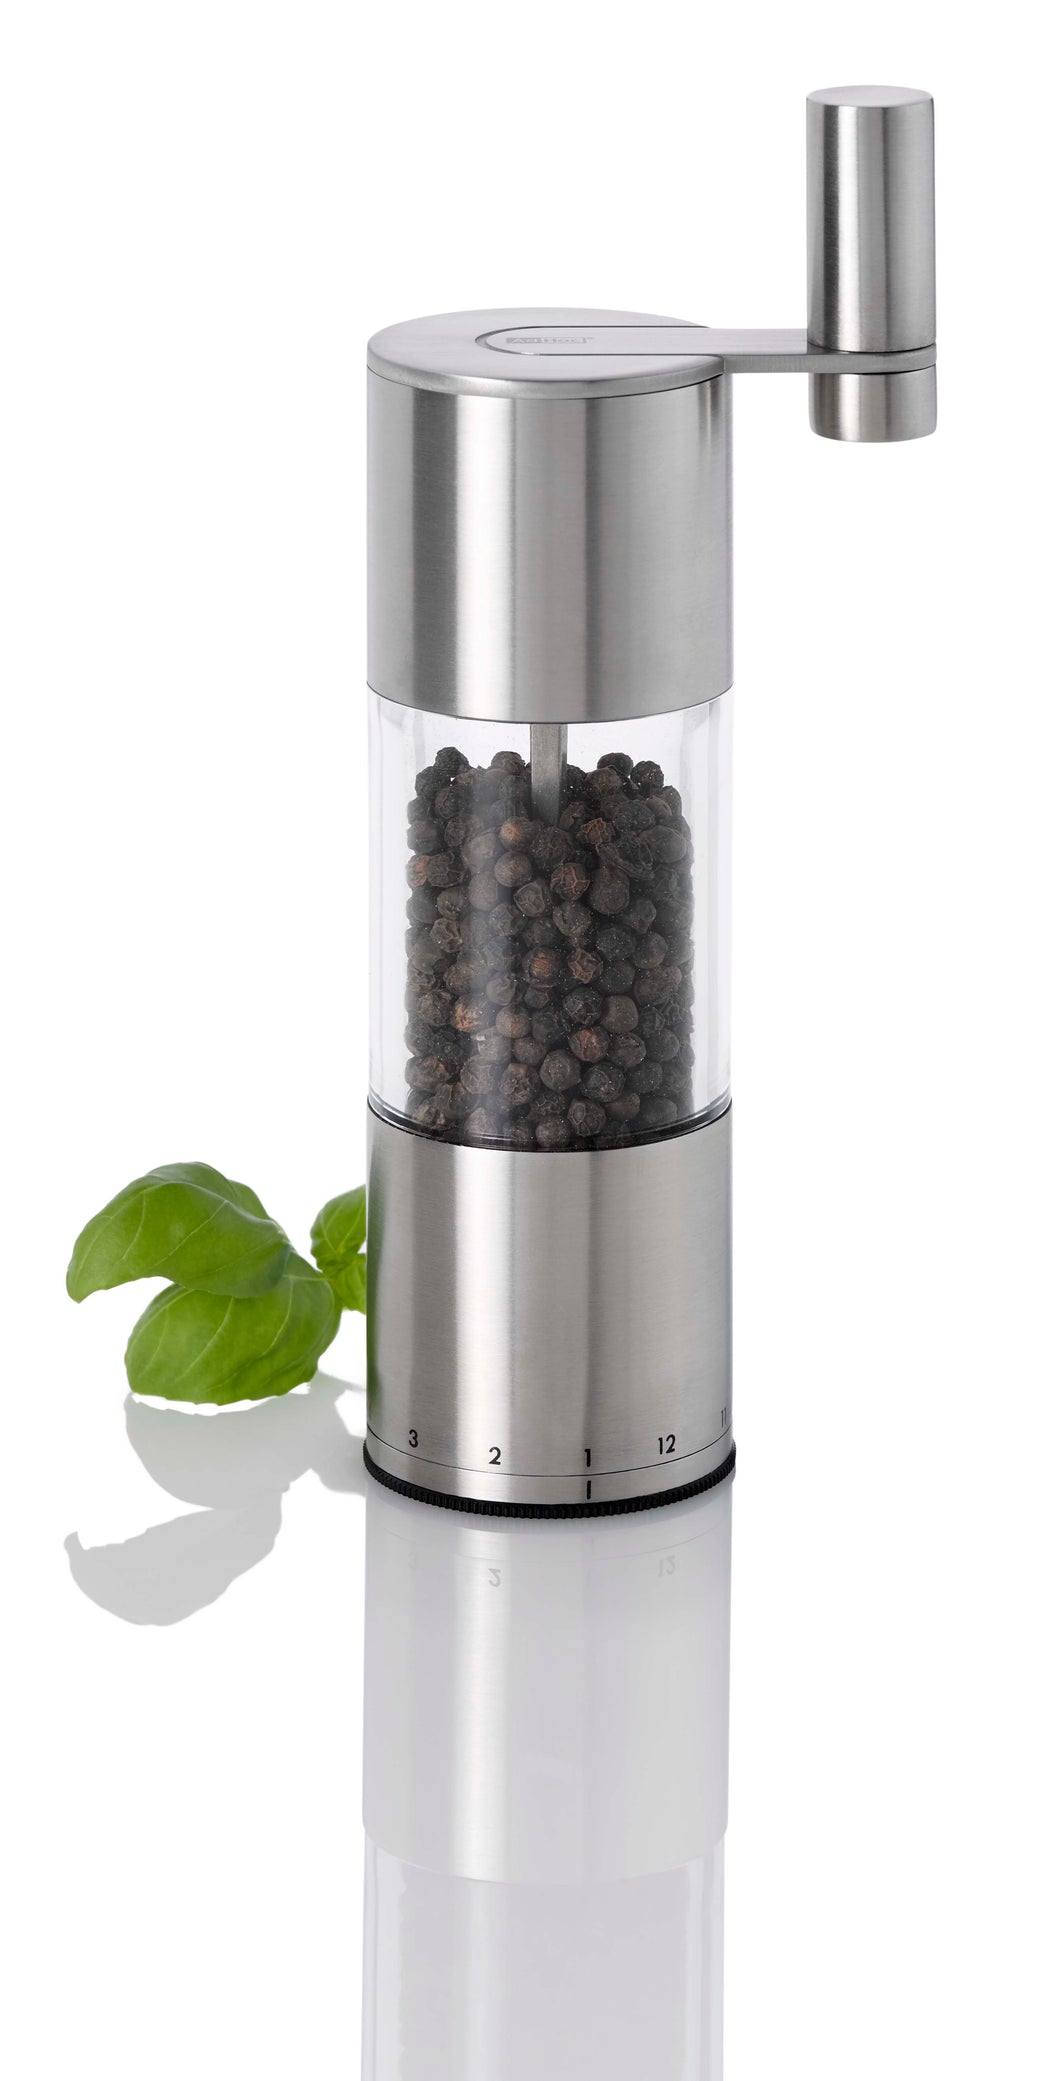 Greenco Automatic Electric Pepper Mill and Salt Grinder, Stainless Steel 